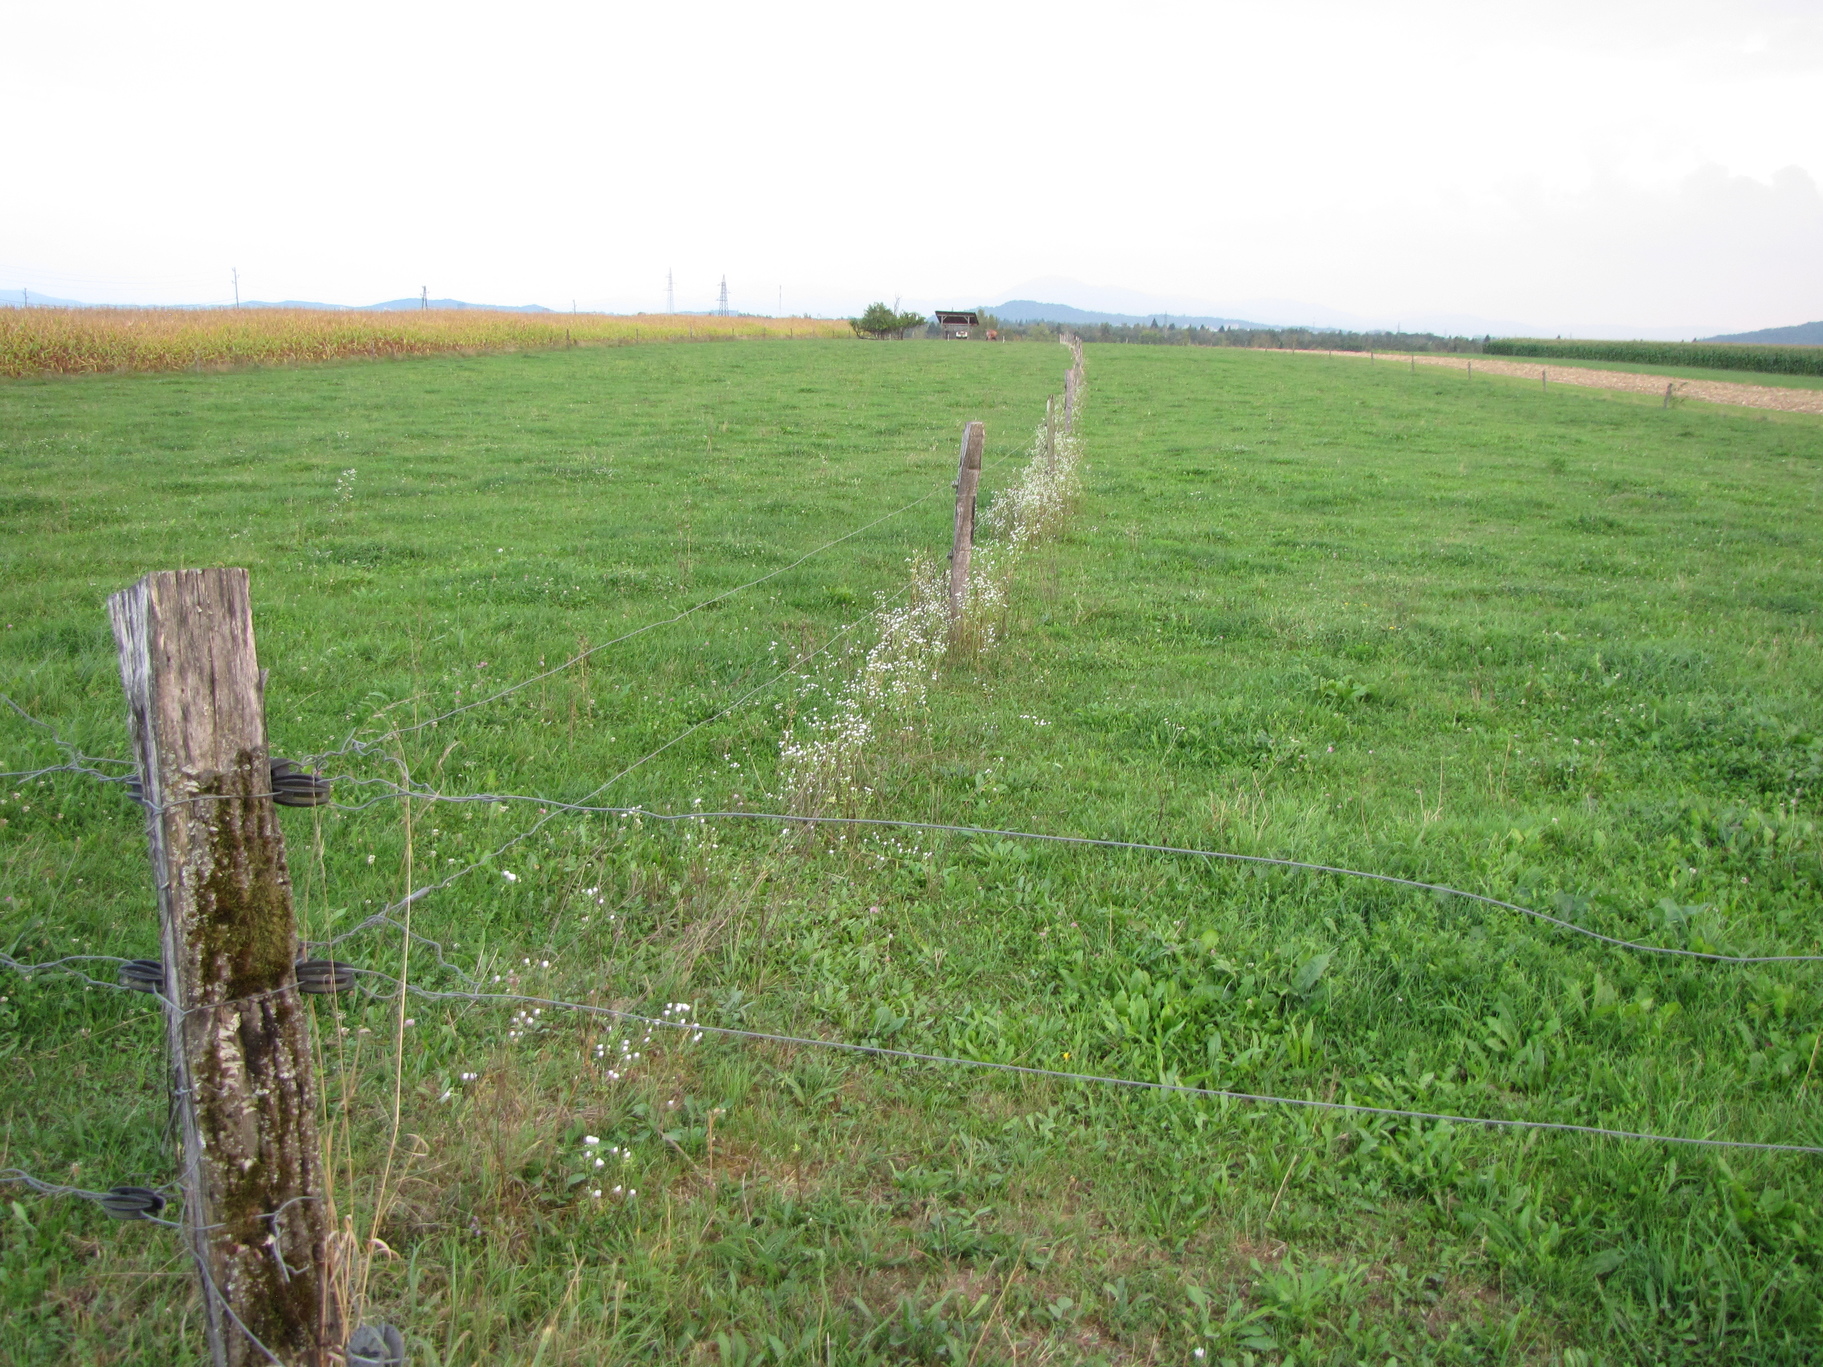 Former drought exposed fields converted to grazing pastures